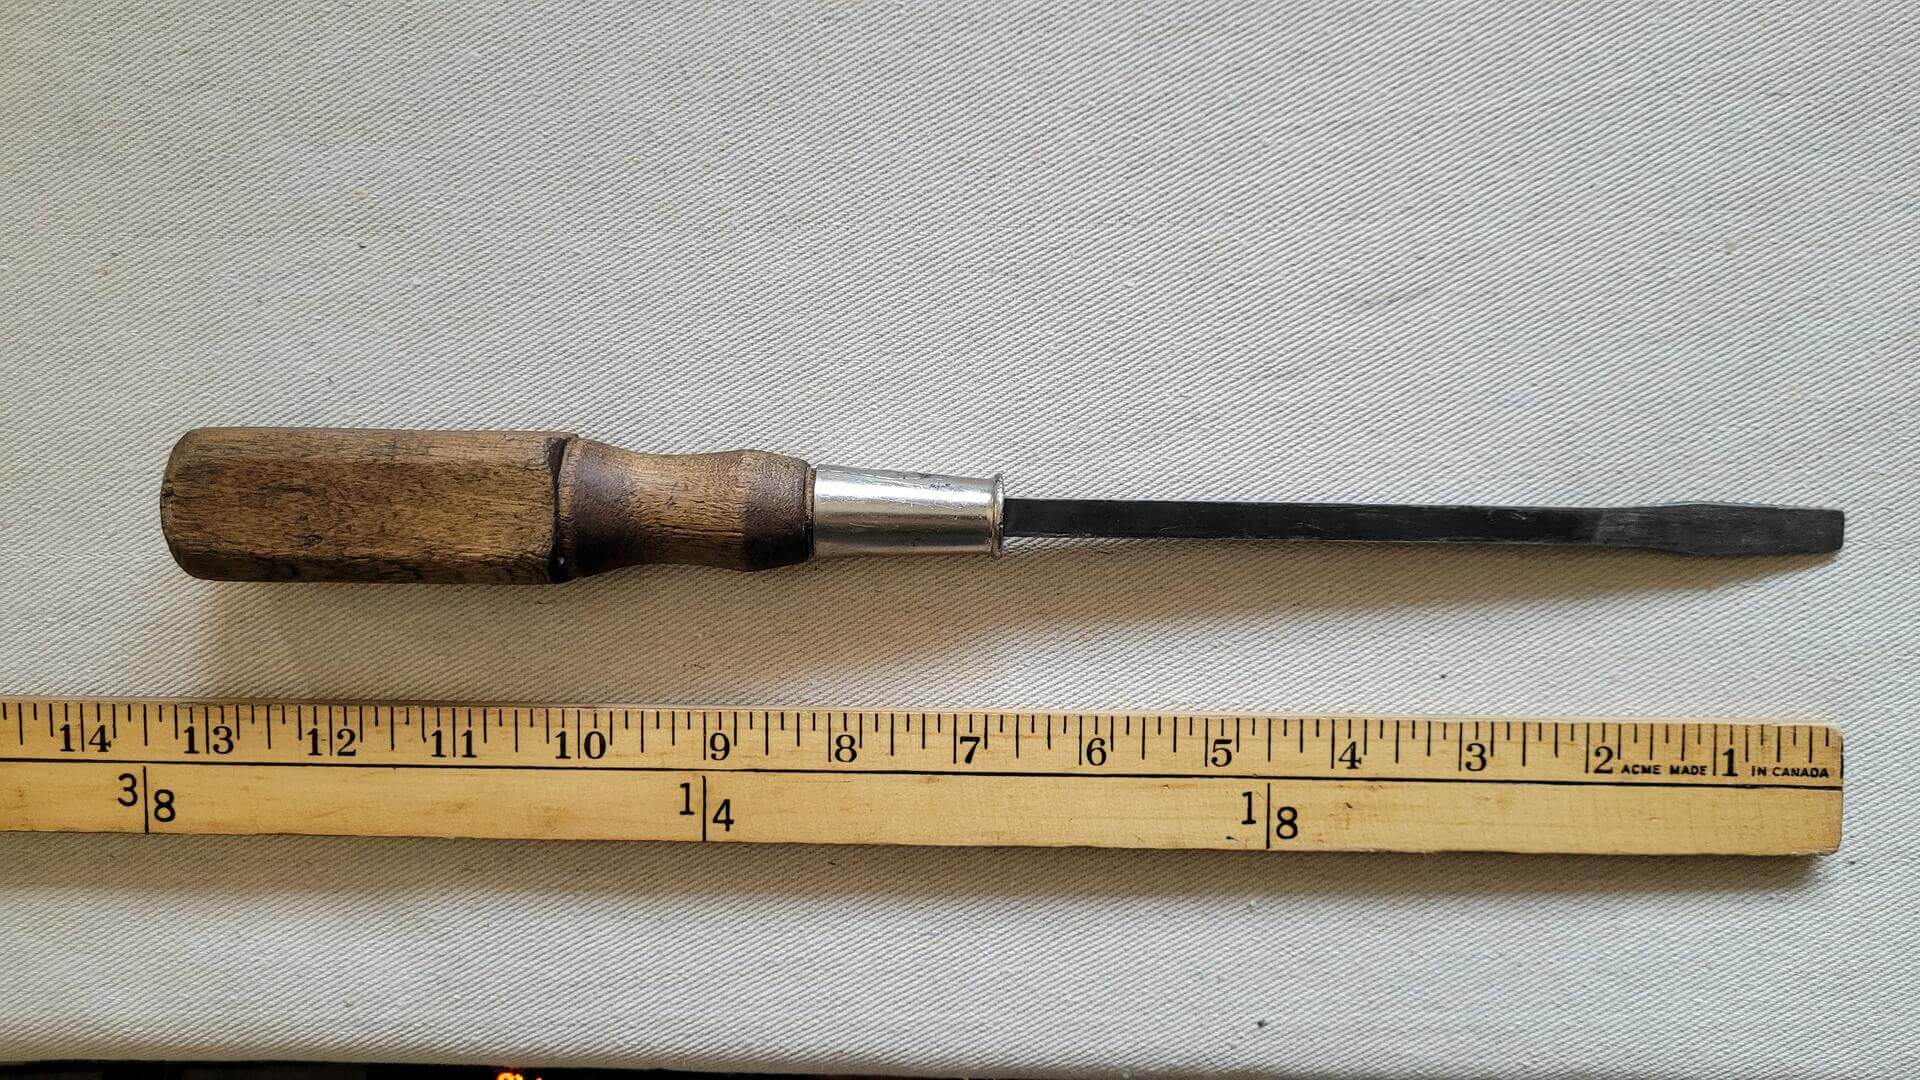 Large antique square shank flathead screwdriver with wooden handle 13 inches long. Vintage collectible cabinet maker and craftsman quality hand tools